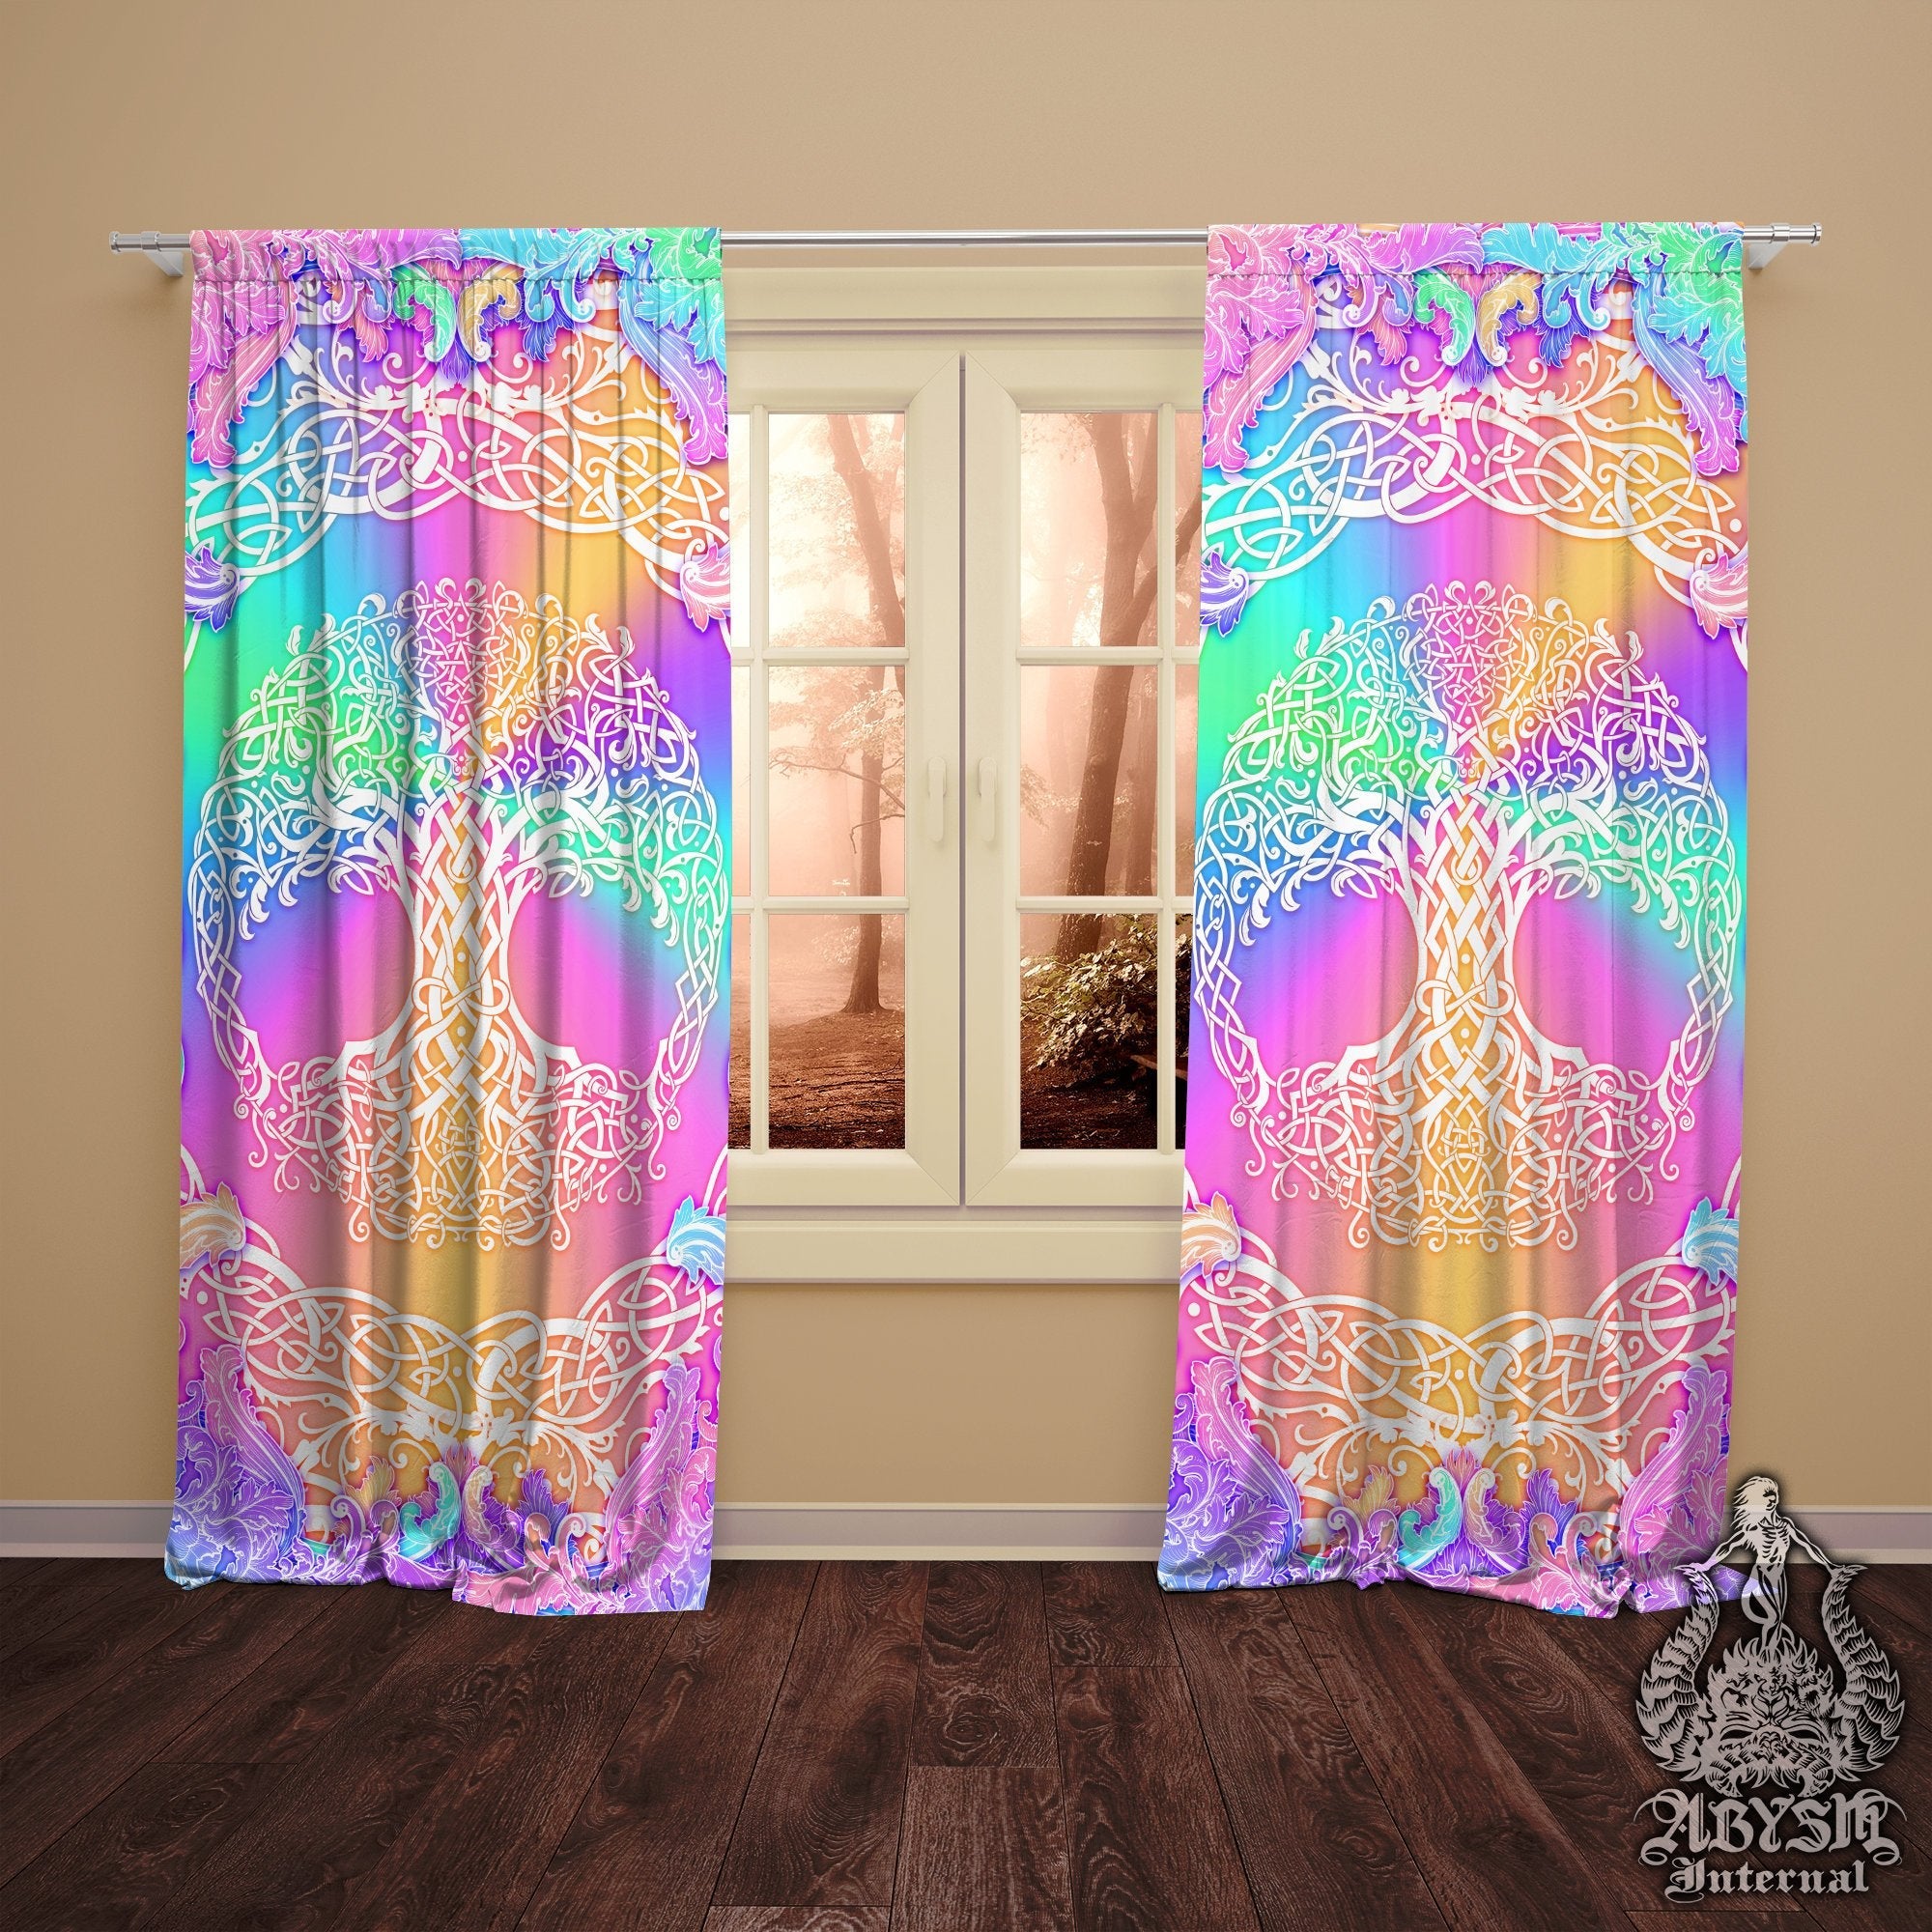 Tree of Life Blackout Curtains, Long Window Panels, Celtic Knot, Wiccan Decor, Art Print, Funky and Eclectic Home Decor - Holographic and Aesthetic Room Decor, Pastel - Abysm Internal